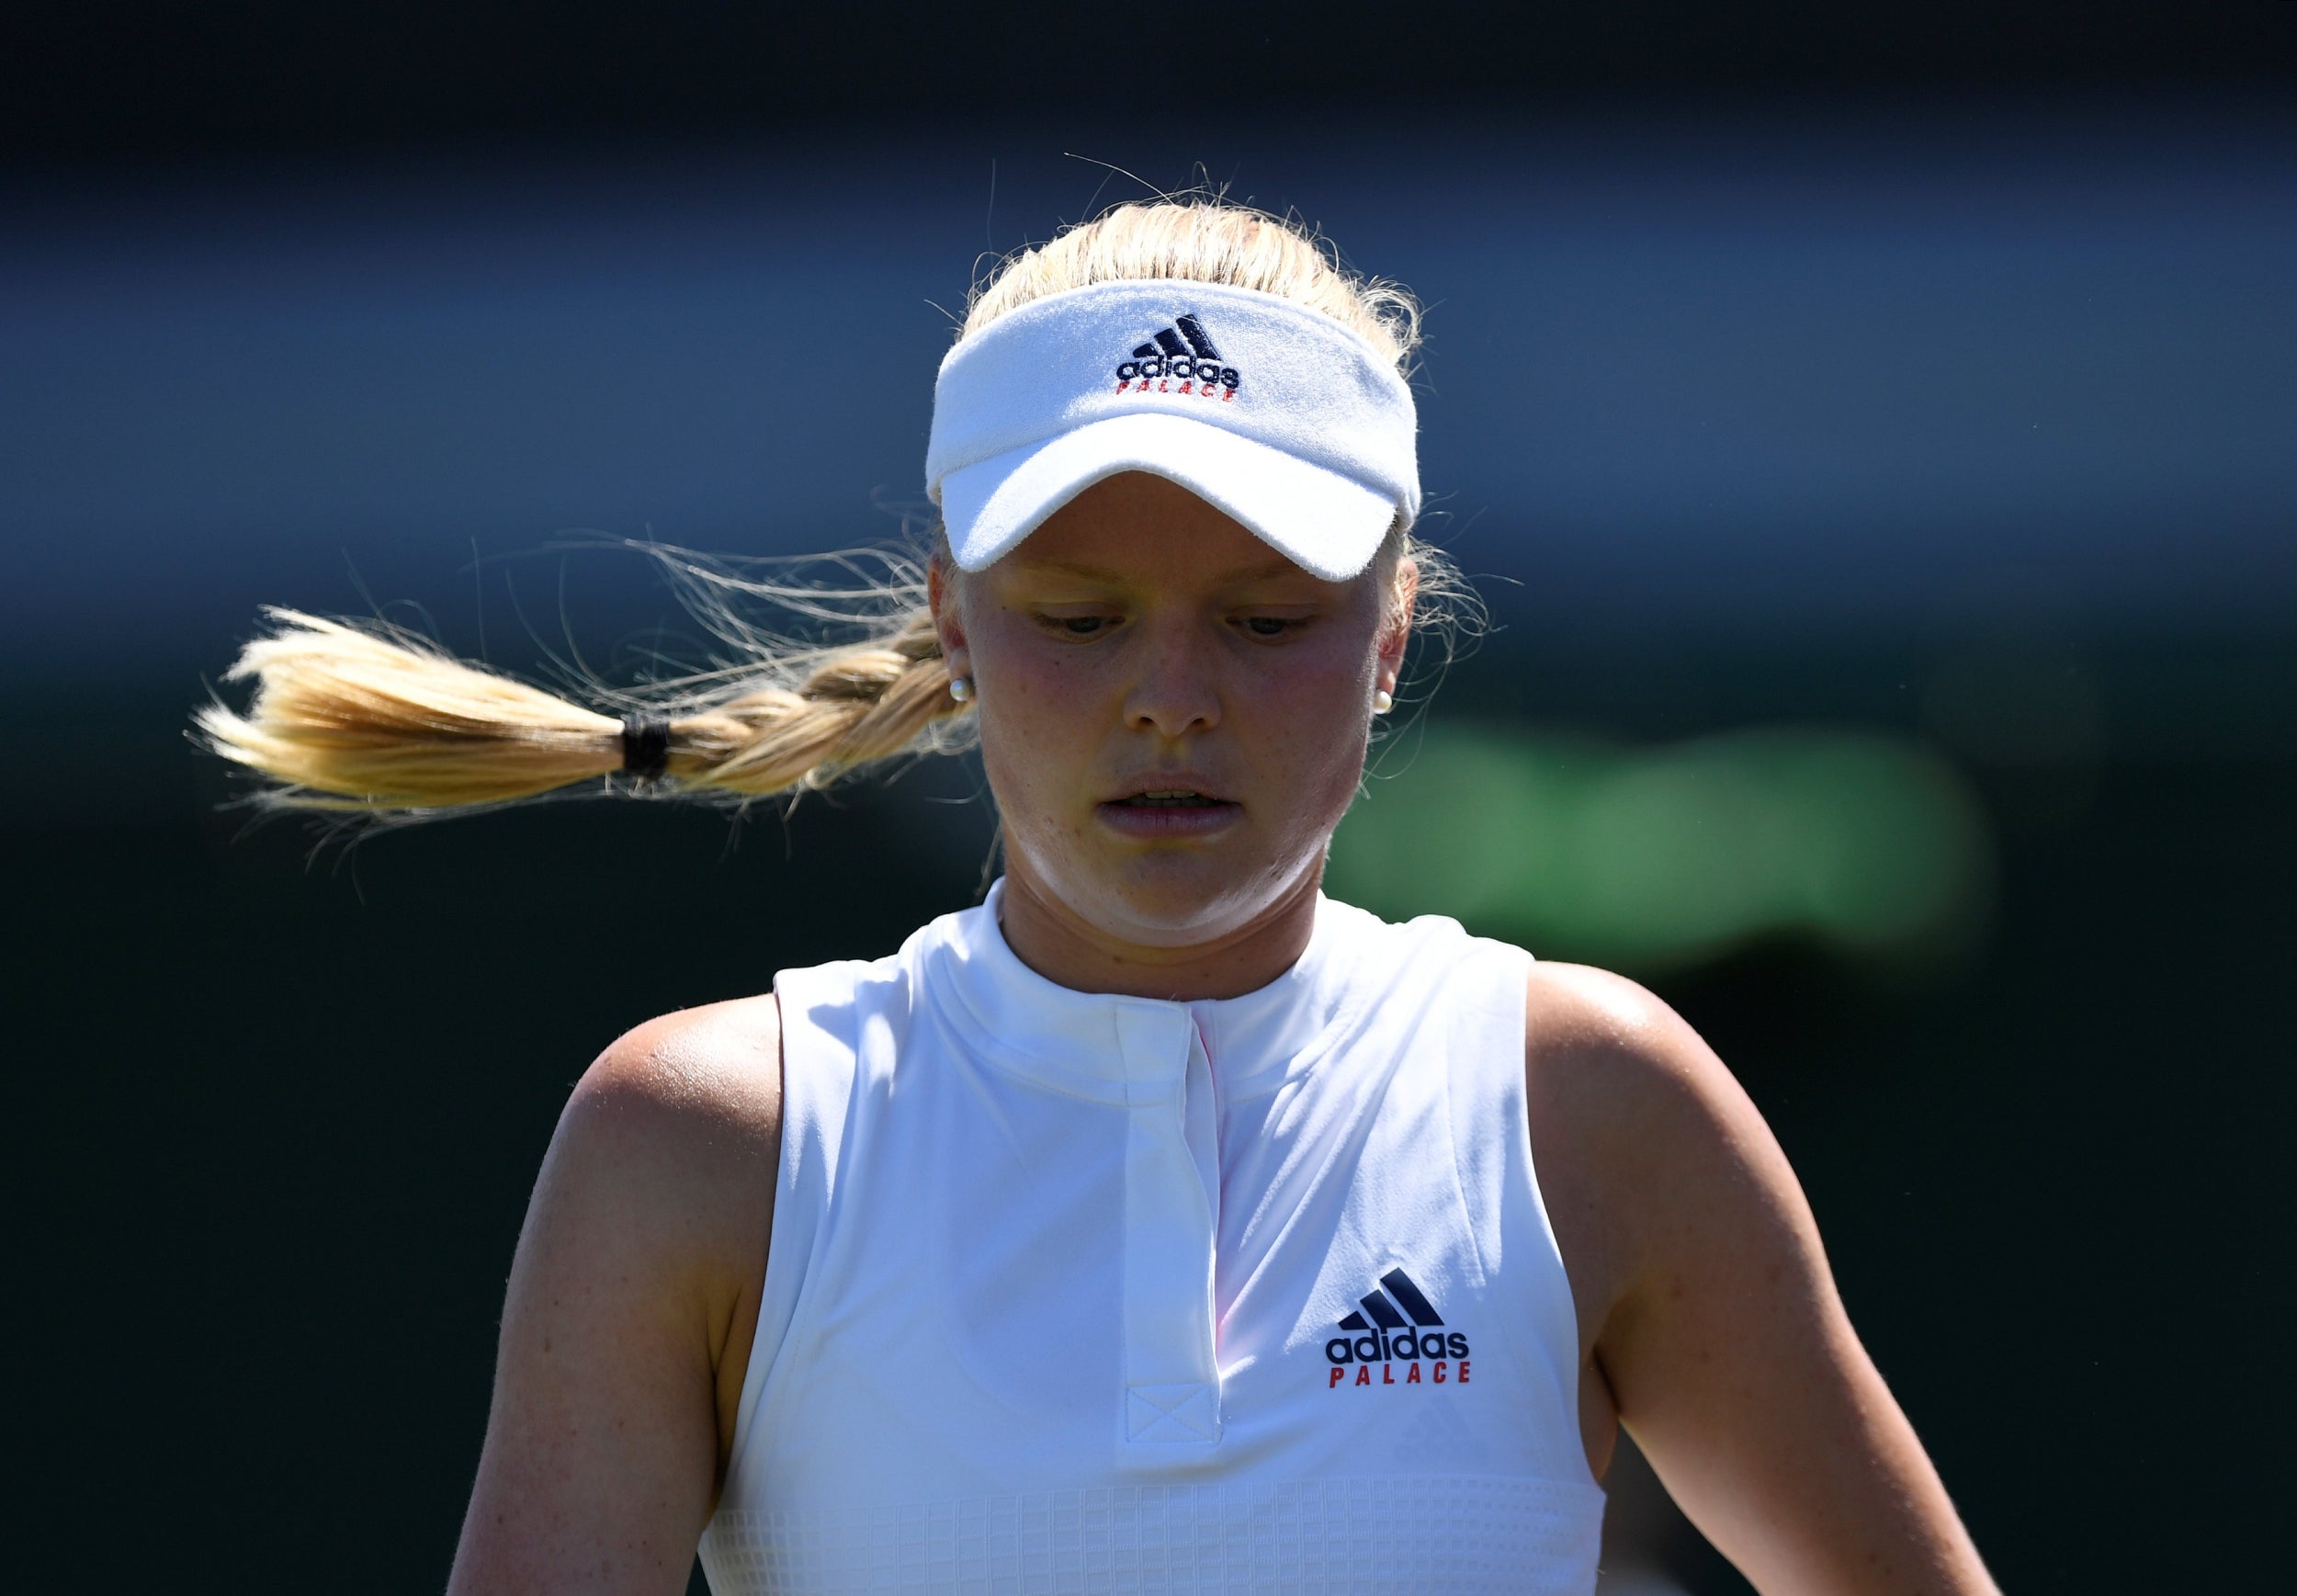 Harriet Dart is two wins away from the main draw at the Australian Open